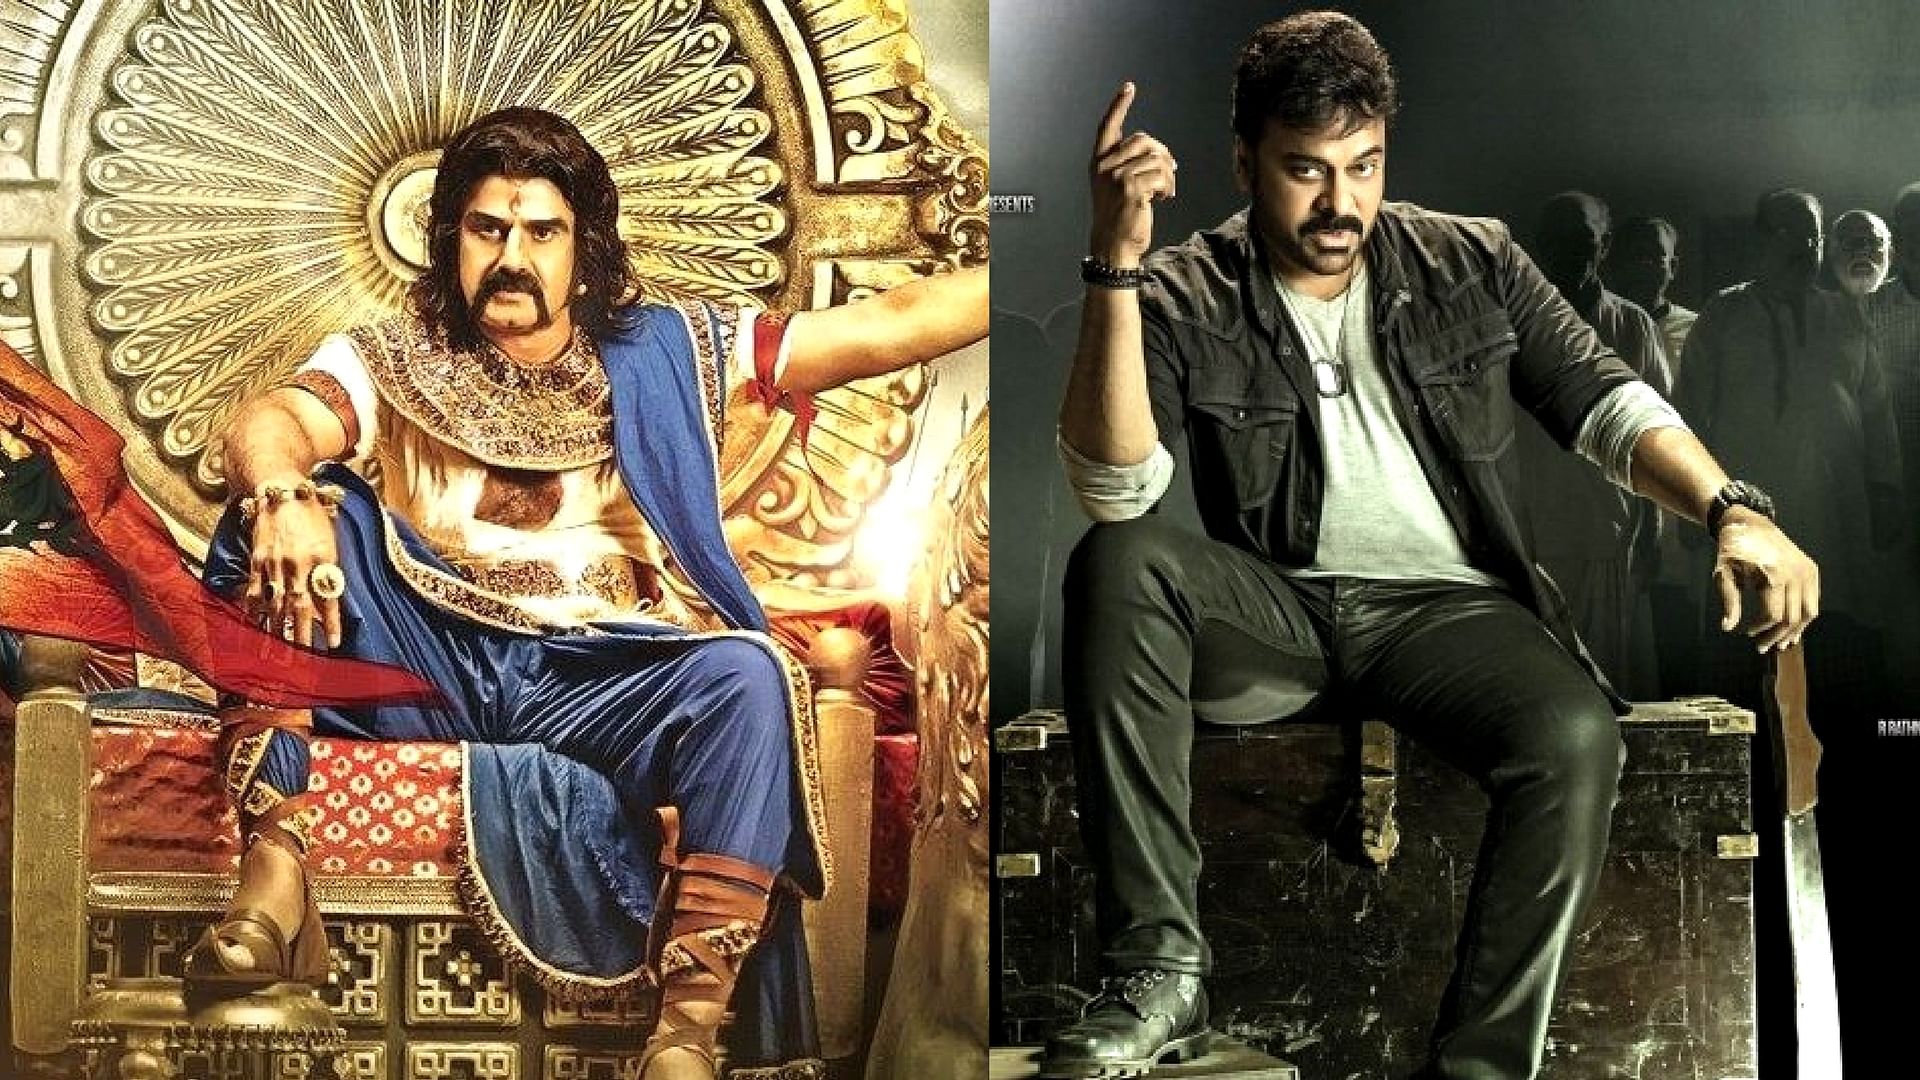 Veteran actors Balakrishna and Chiranjeevi avoid a box office clash, an example for SRK and Hrithik to learn from. (Photo courtesy: Twitter)